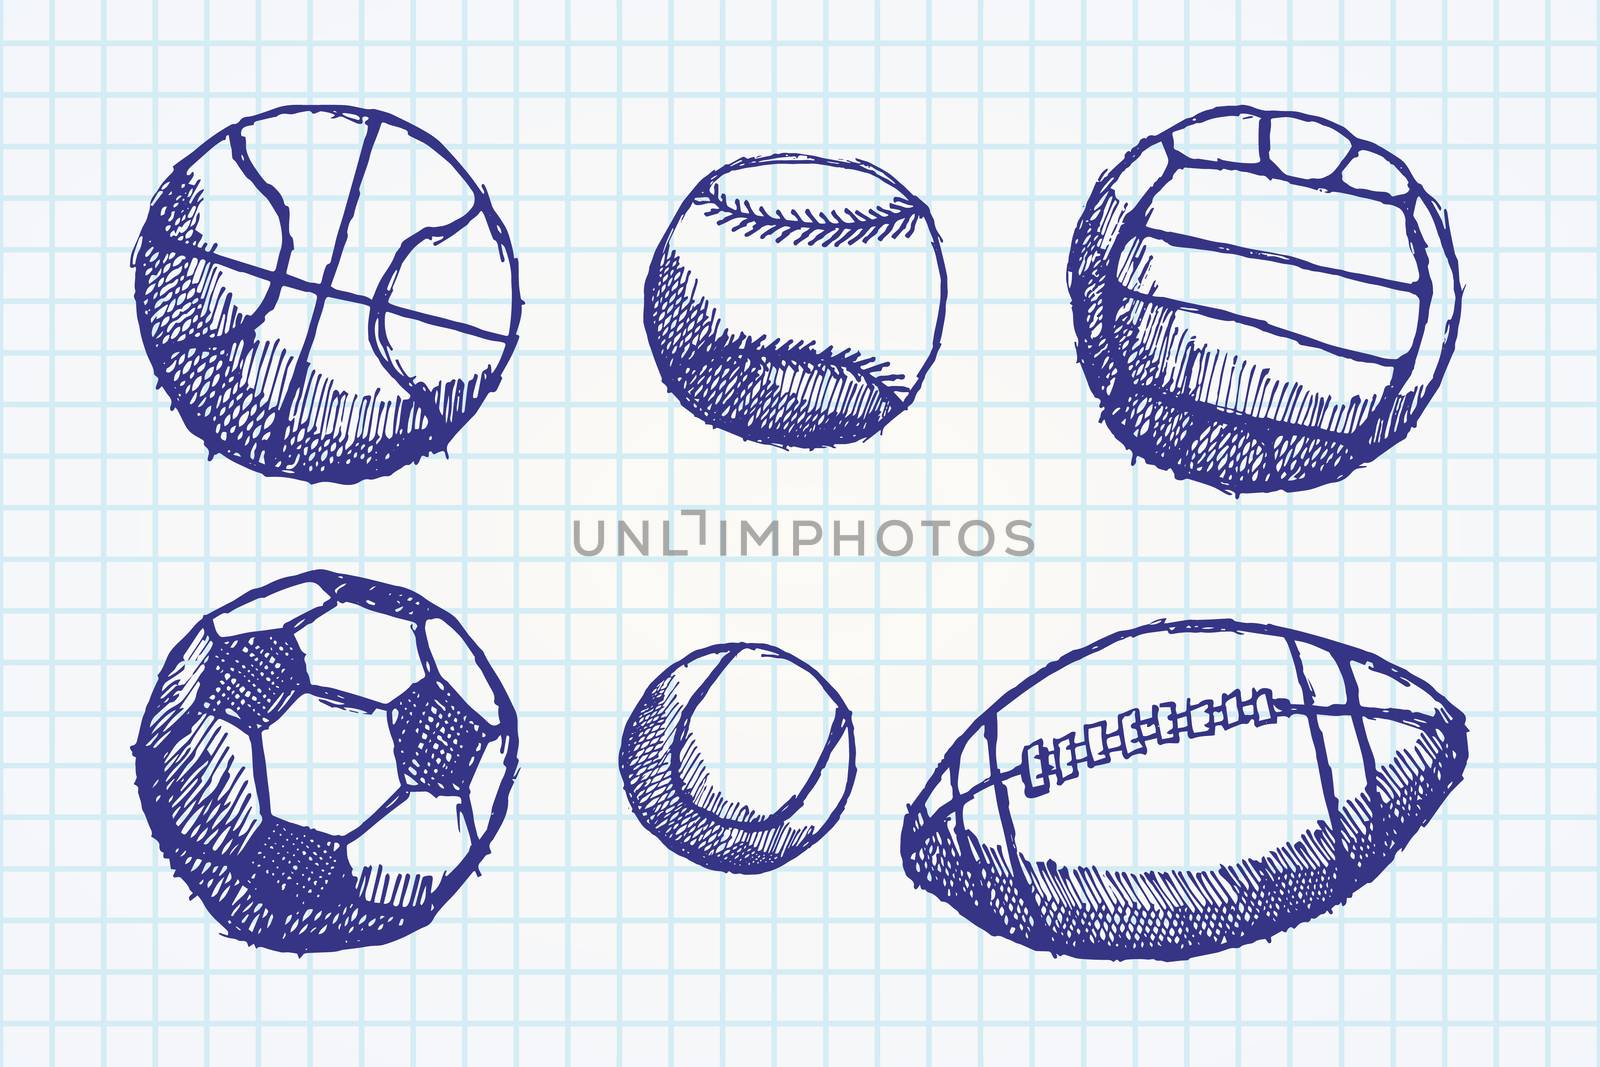 Ball sketch set with shadow on paper notebook by Lemon_workshop